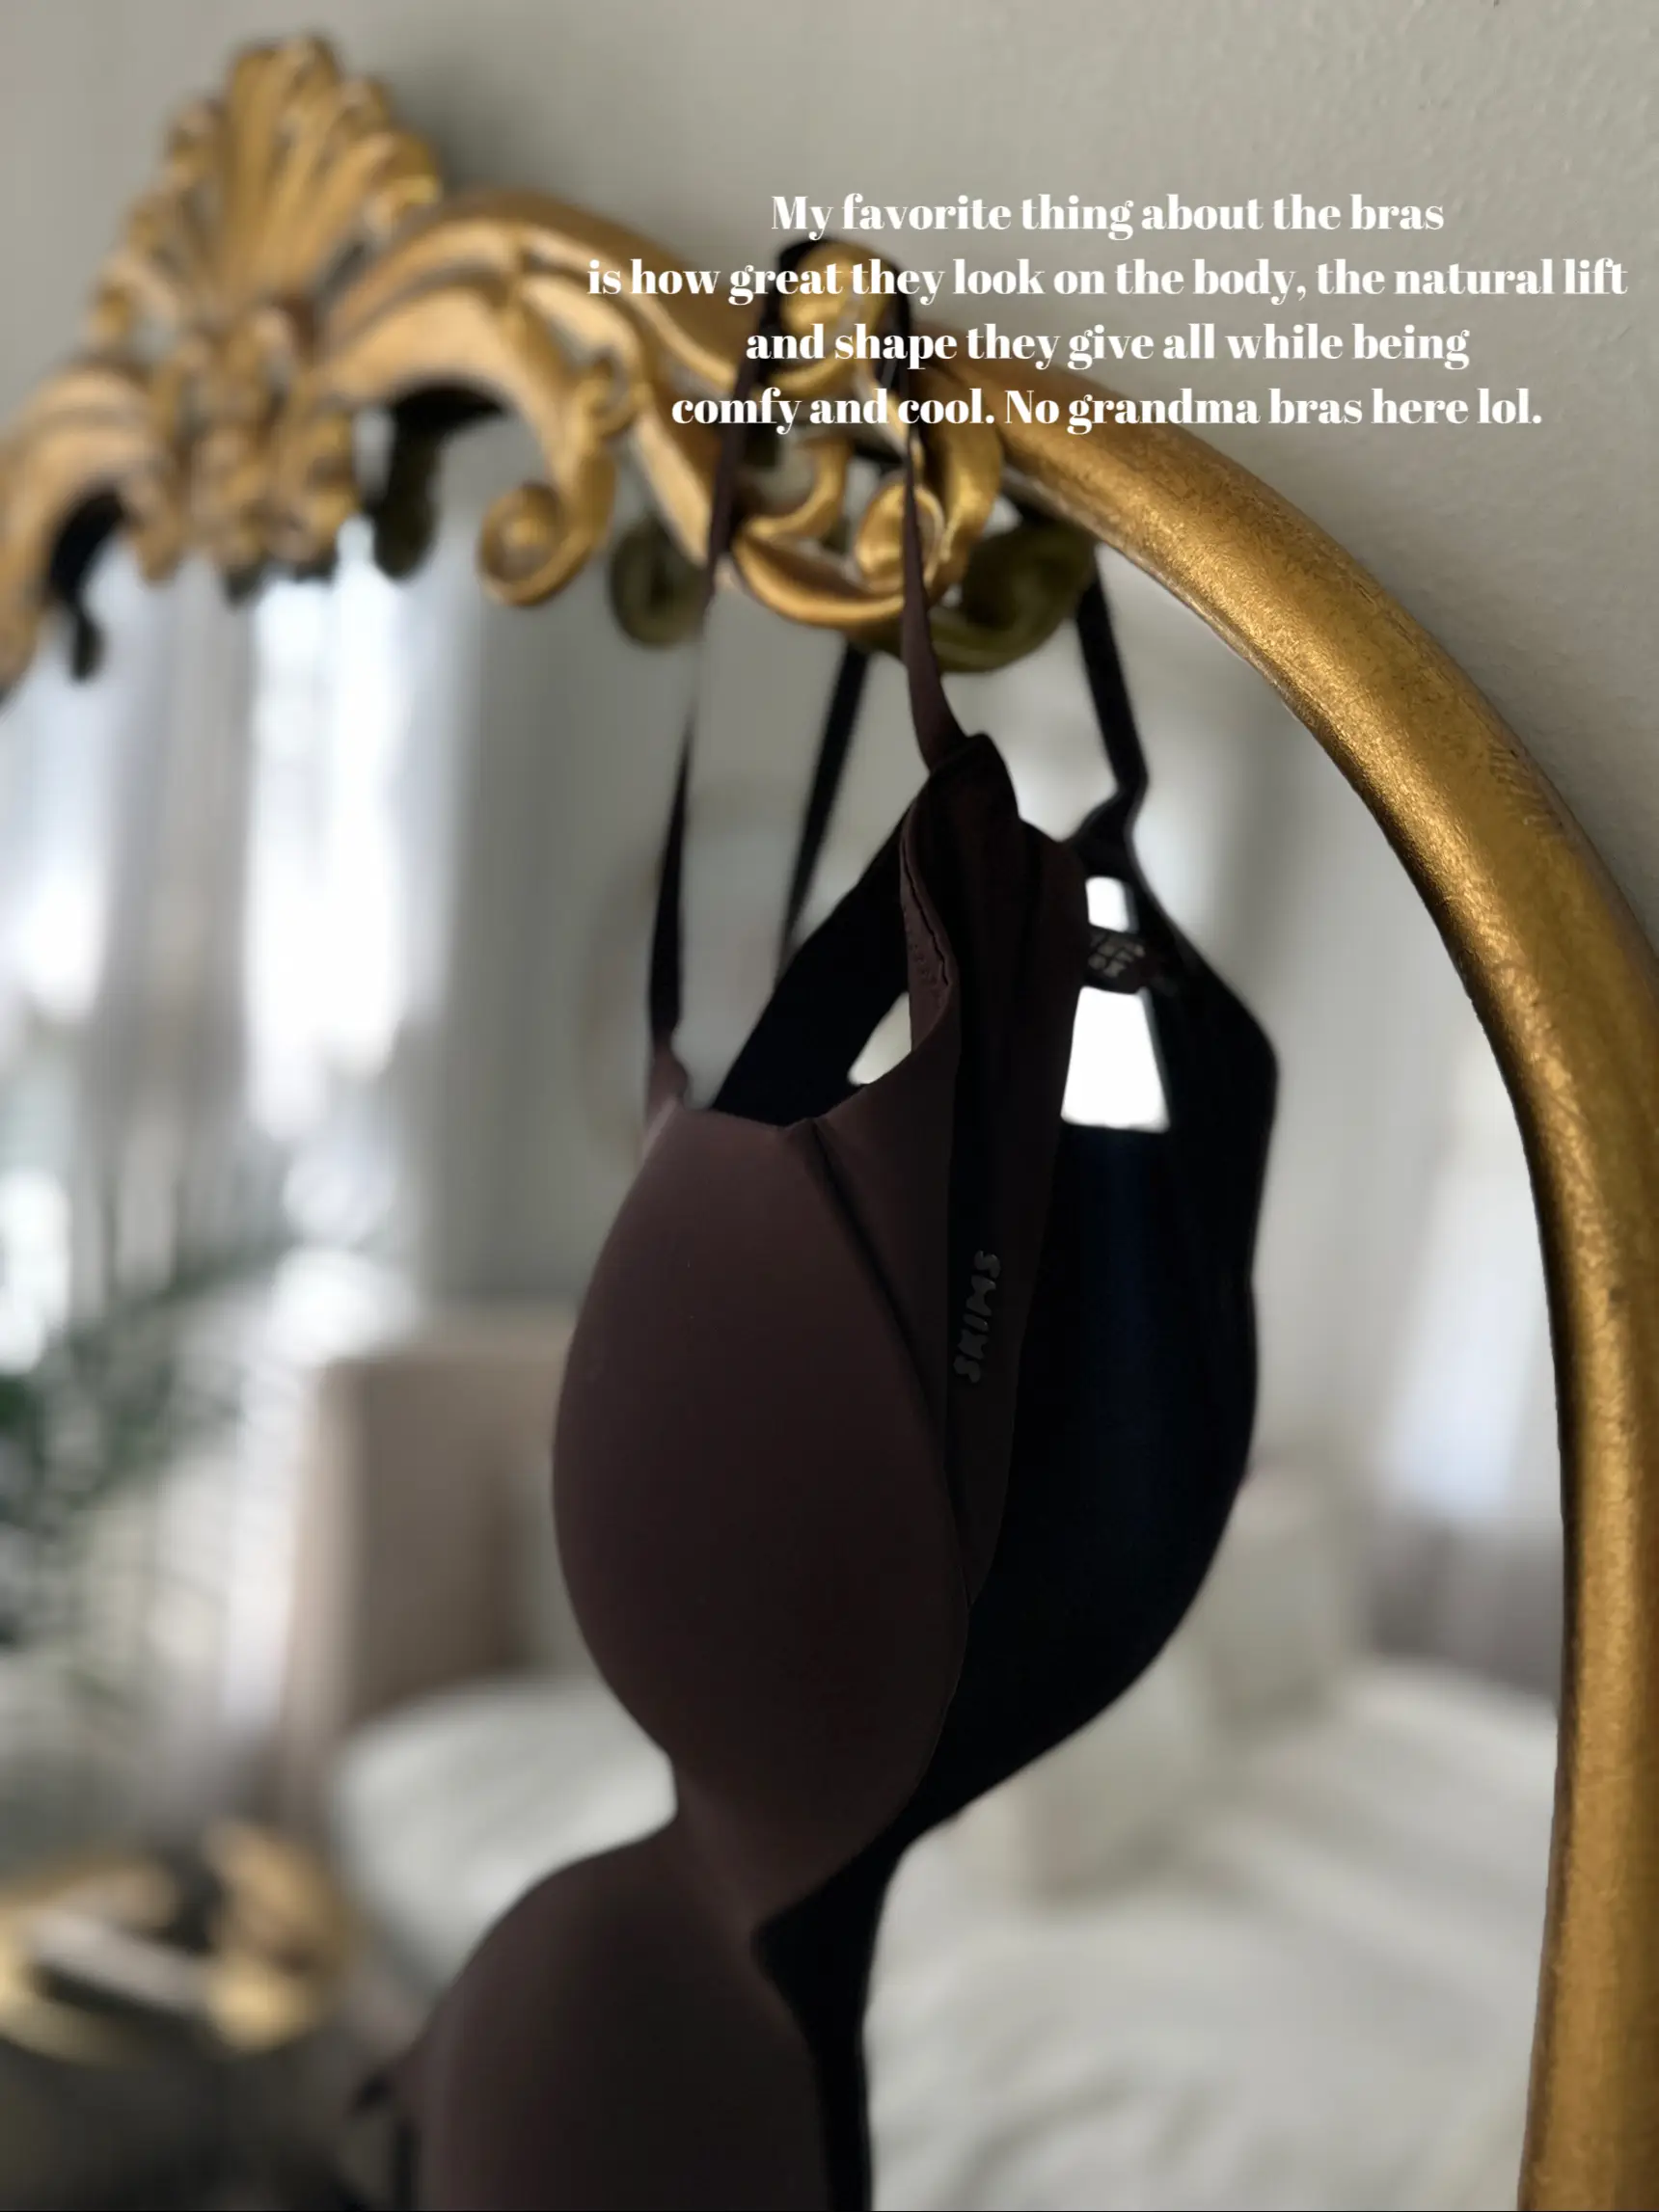 Best-Selling Skims Bras Review  Gallery posted by StephaniePernas